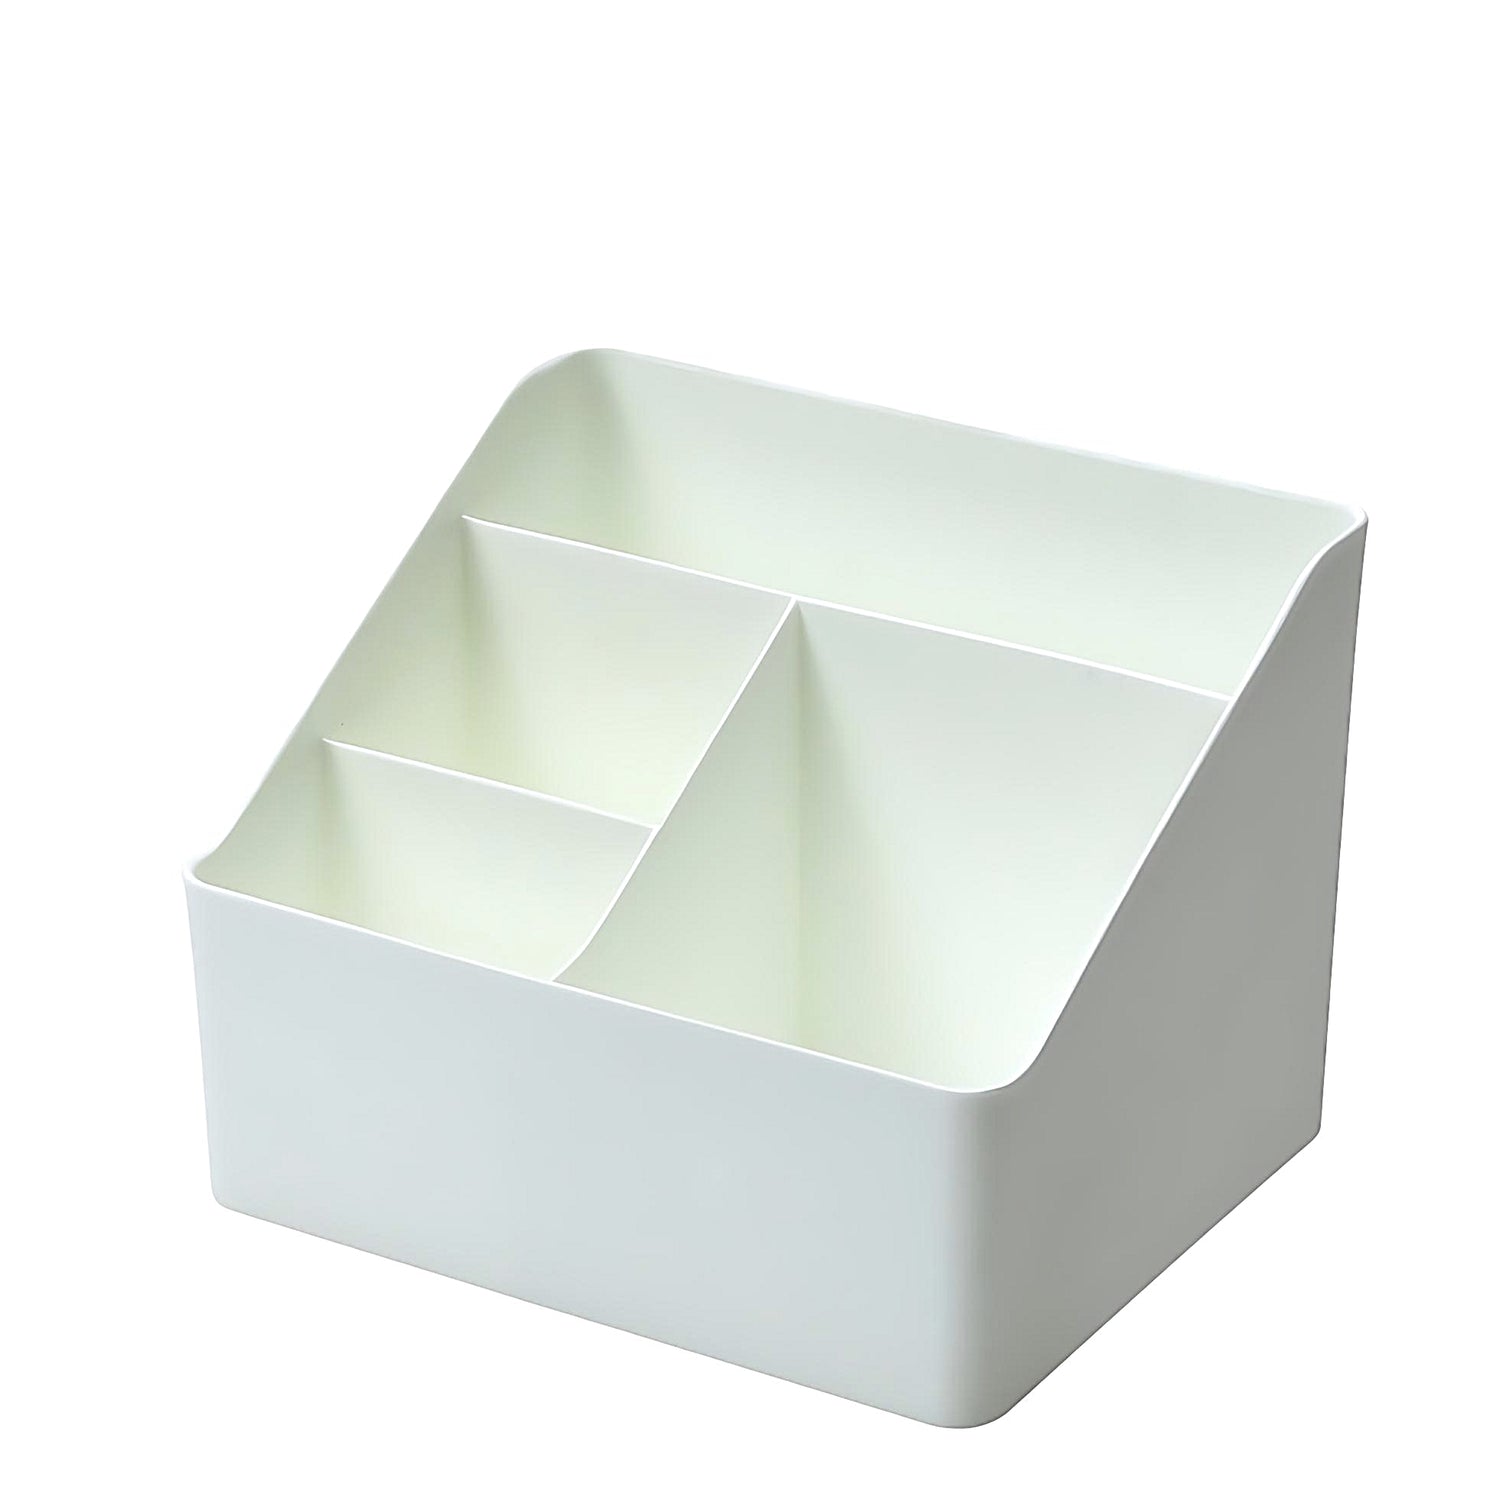 a white desktop organizer with four compartments on a white background